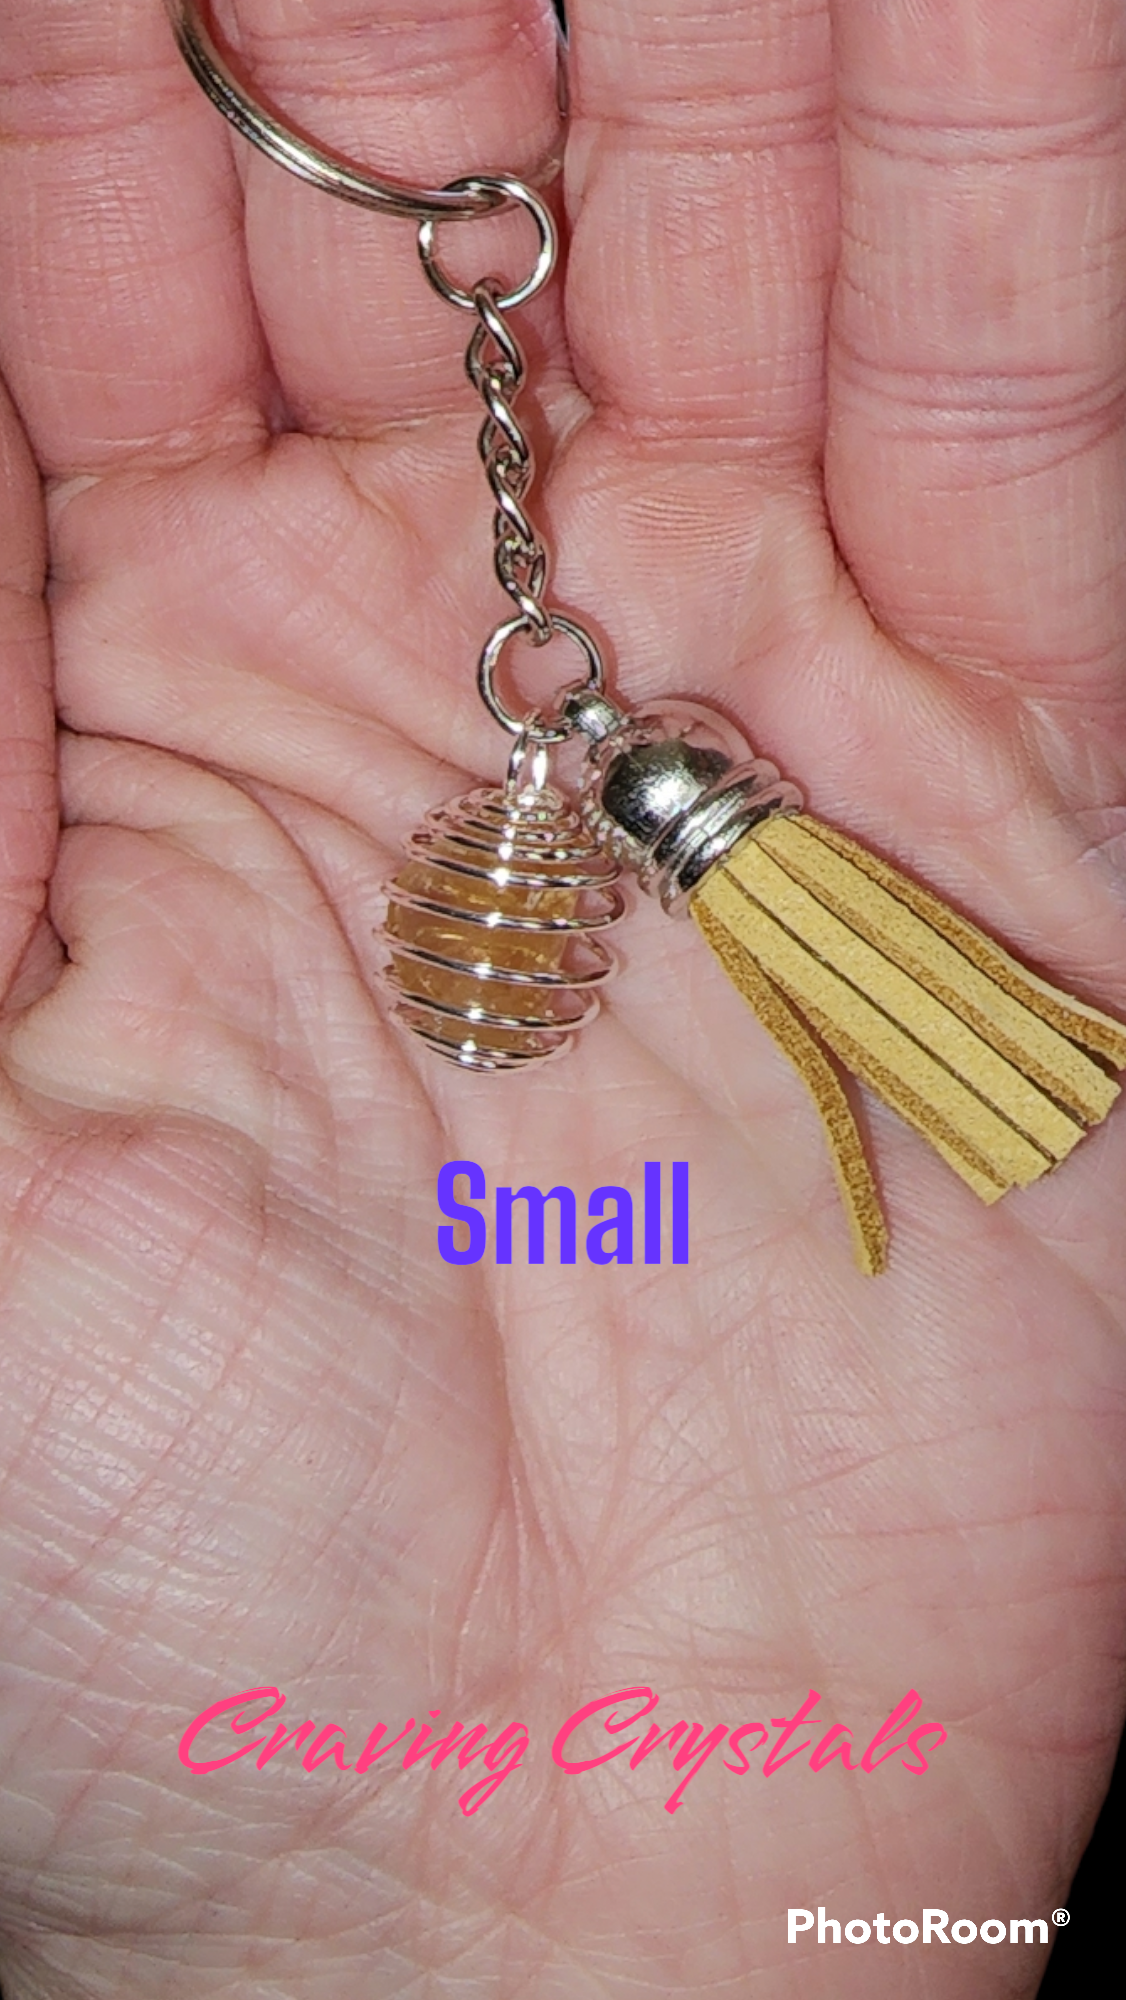 Handmade Crystal Keychains w/ Expandable Cage and Tassels - Reiki Charged Keychains